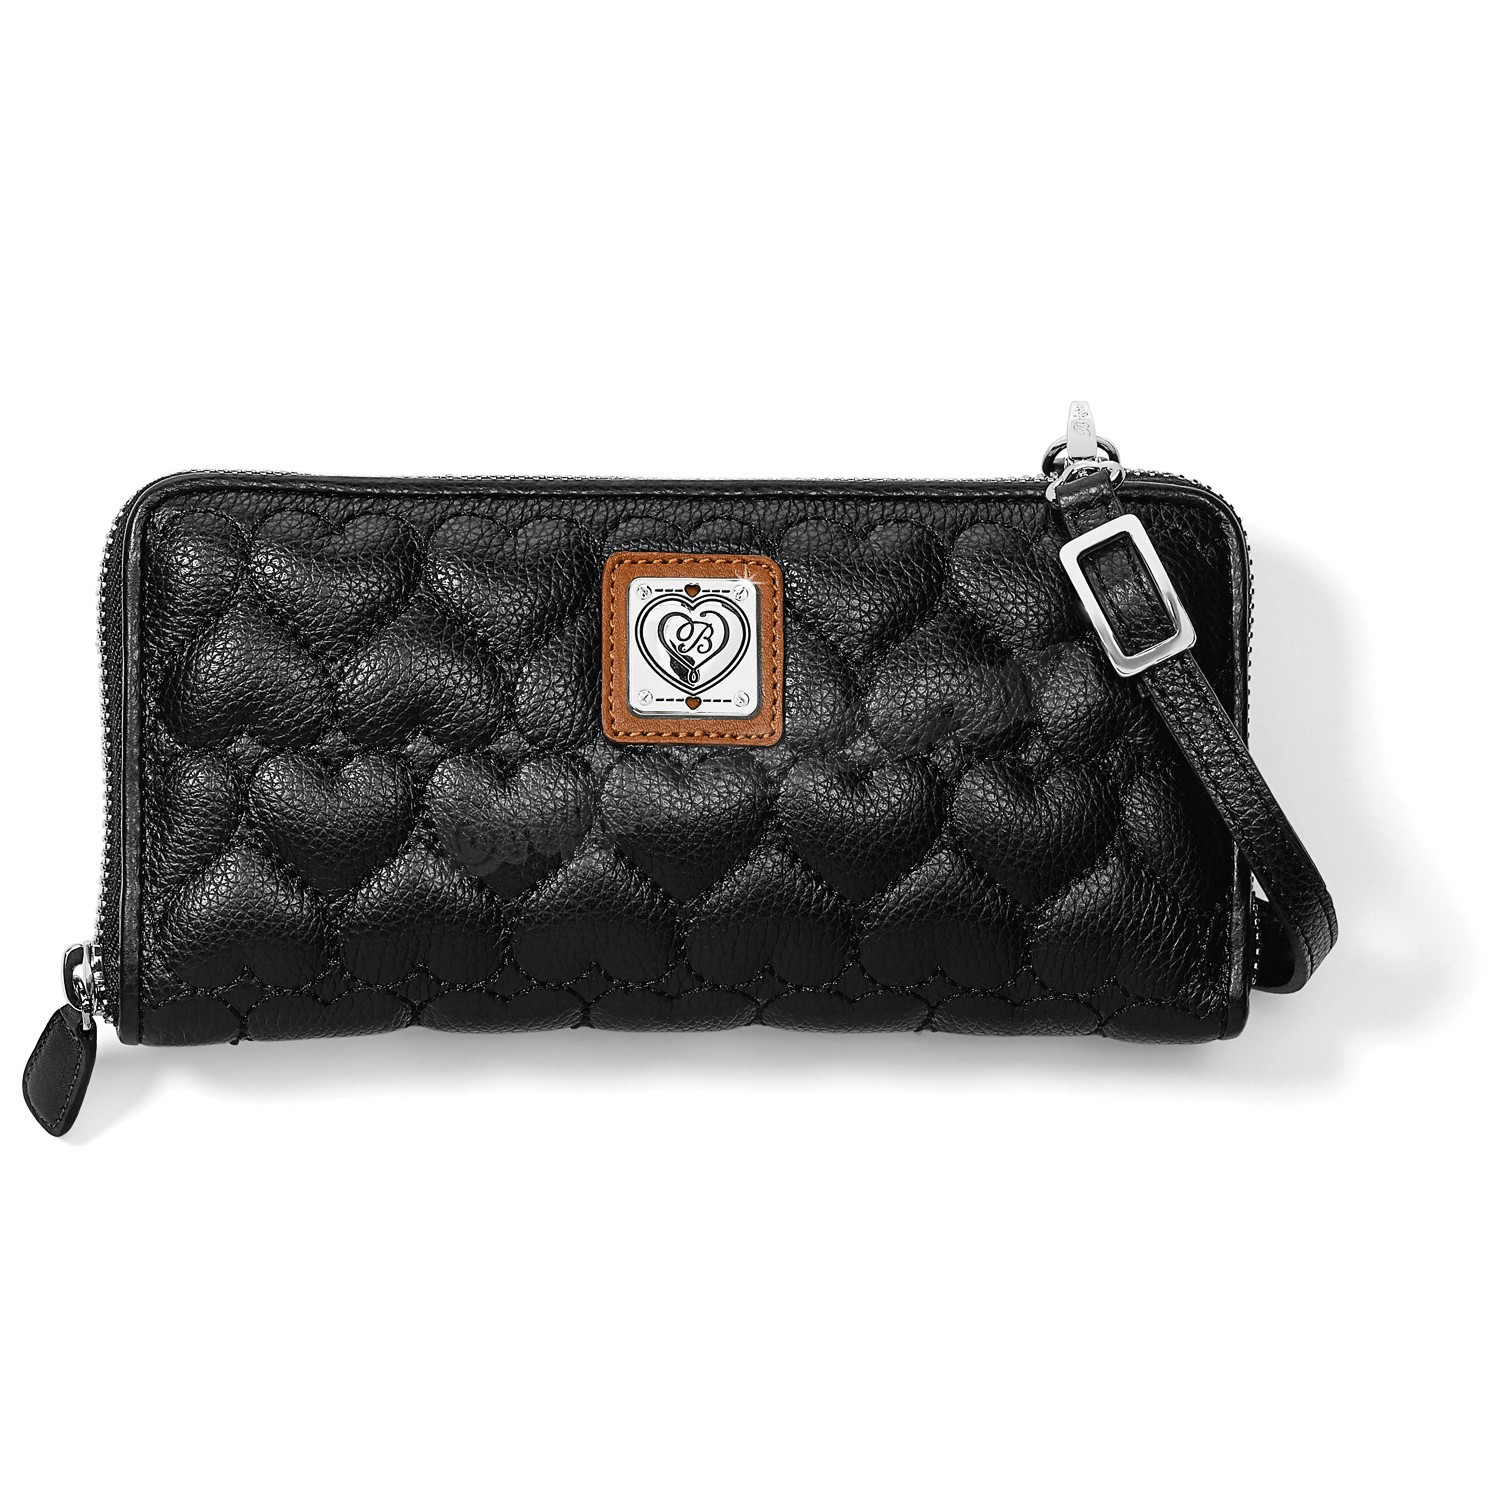 Brighton Collectibles & Online Discount Downtown Girls Cross Body Pouch - Brighton Collectibles & Online Discount Downtown Girls Cross Body Pouch